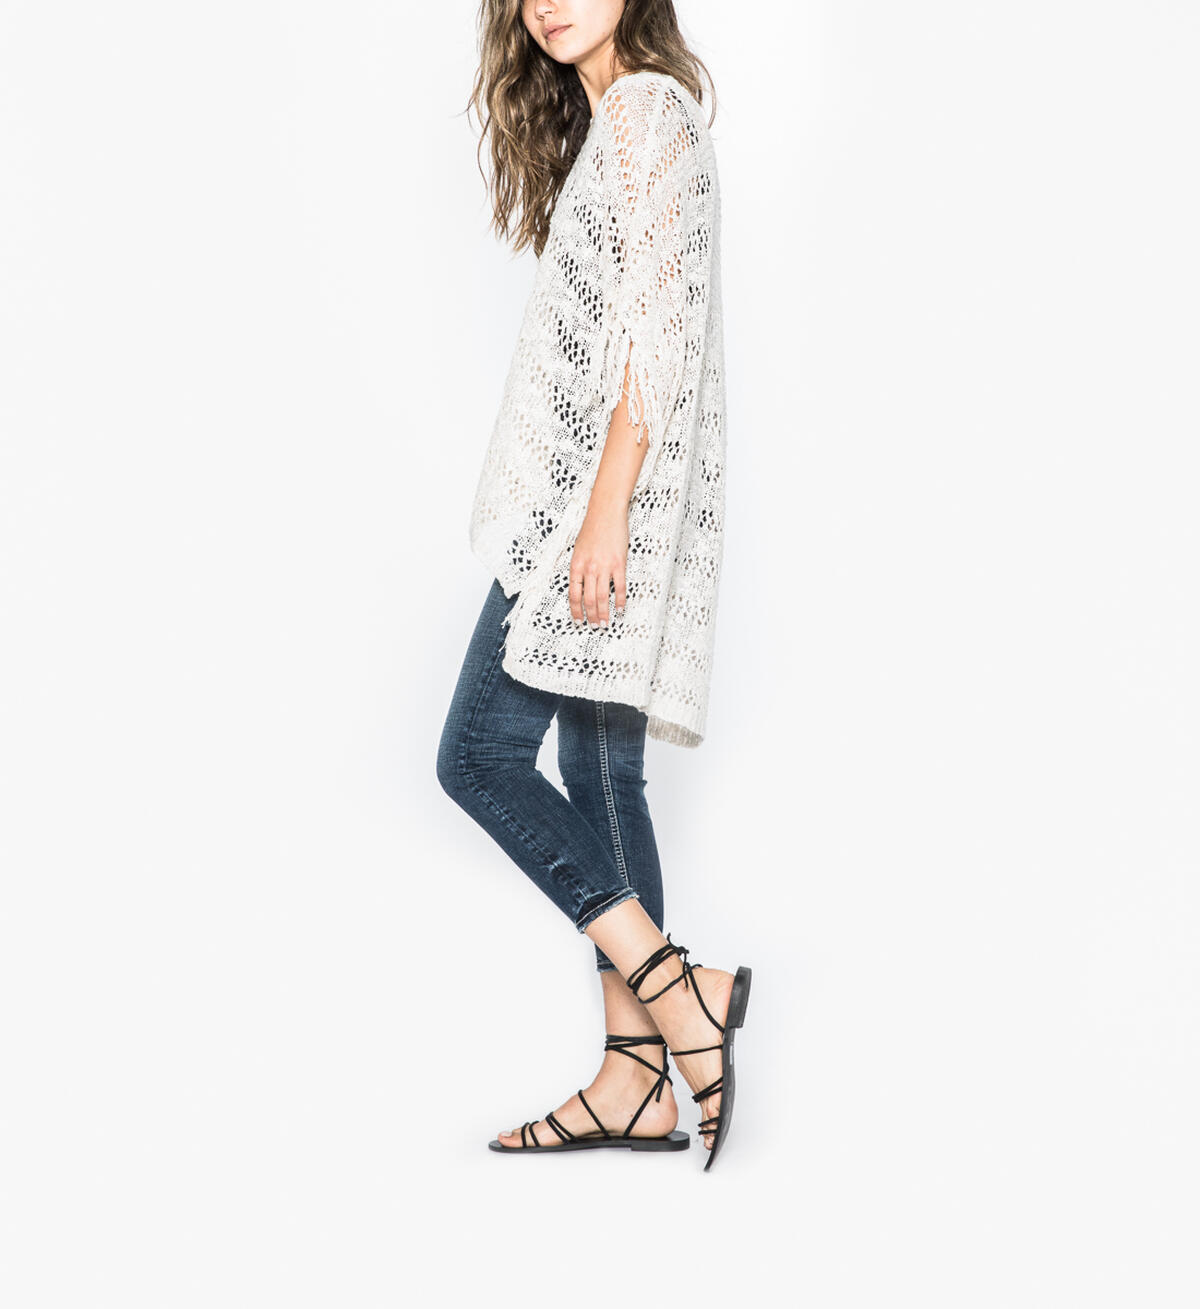 Sierra - Poncho Sweater With Fringe, , hi-res image number 2